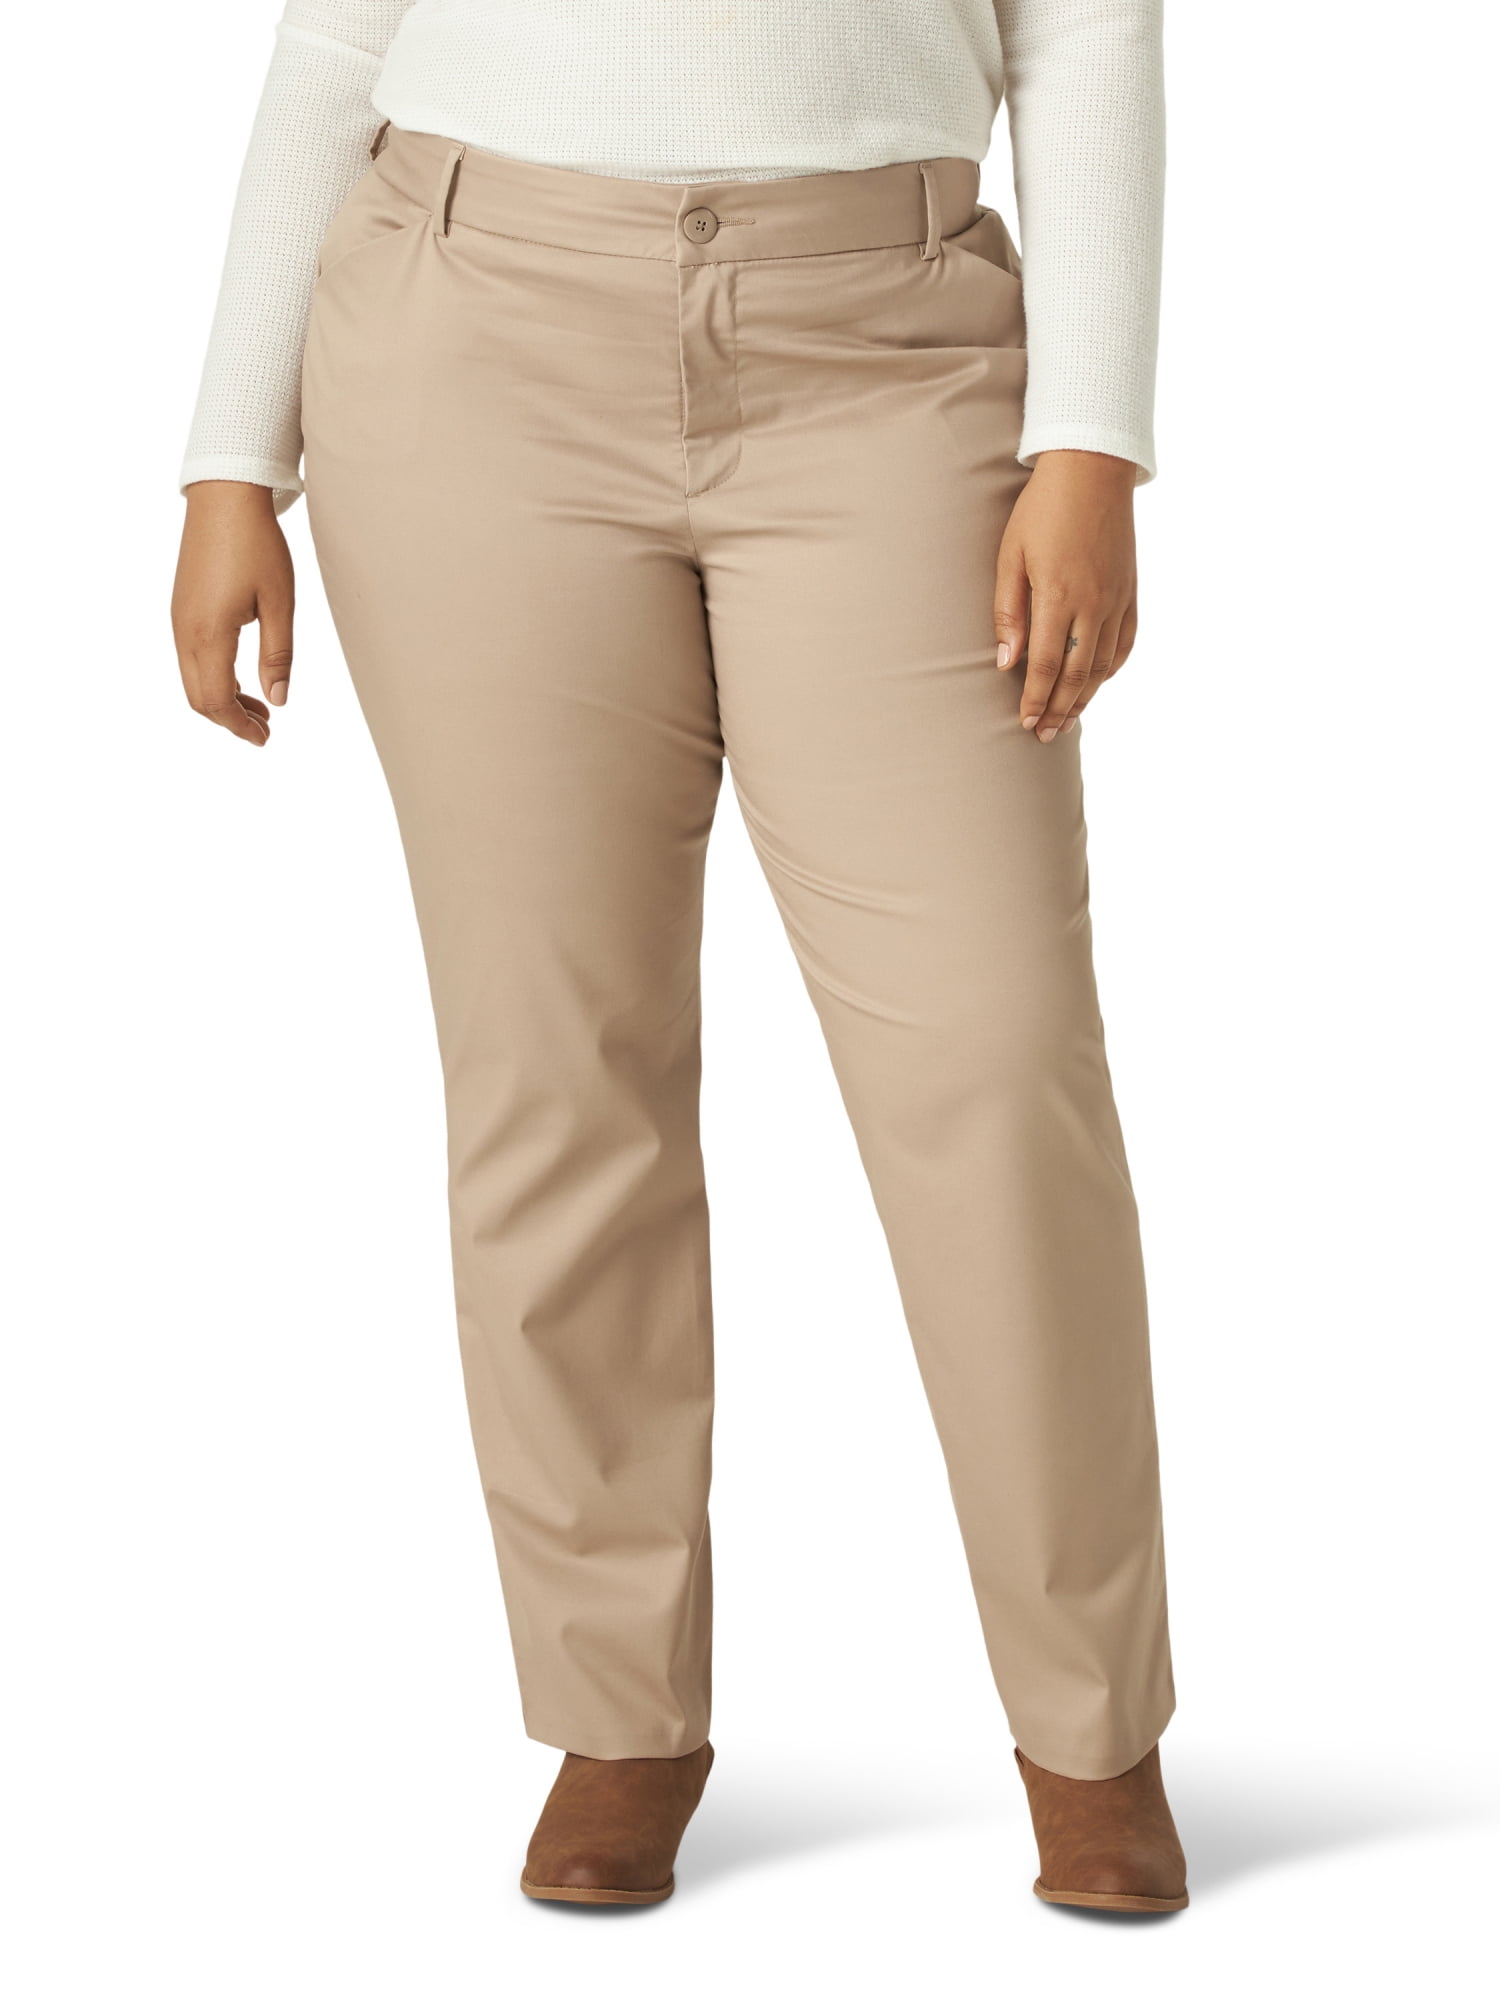 Lee Women's Plus Wrinkle Free Relaxed Fit Straight Leg Pant